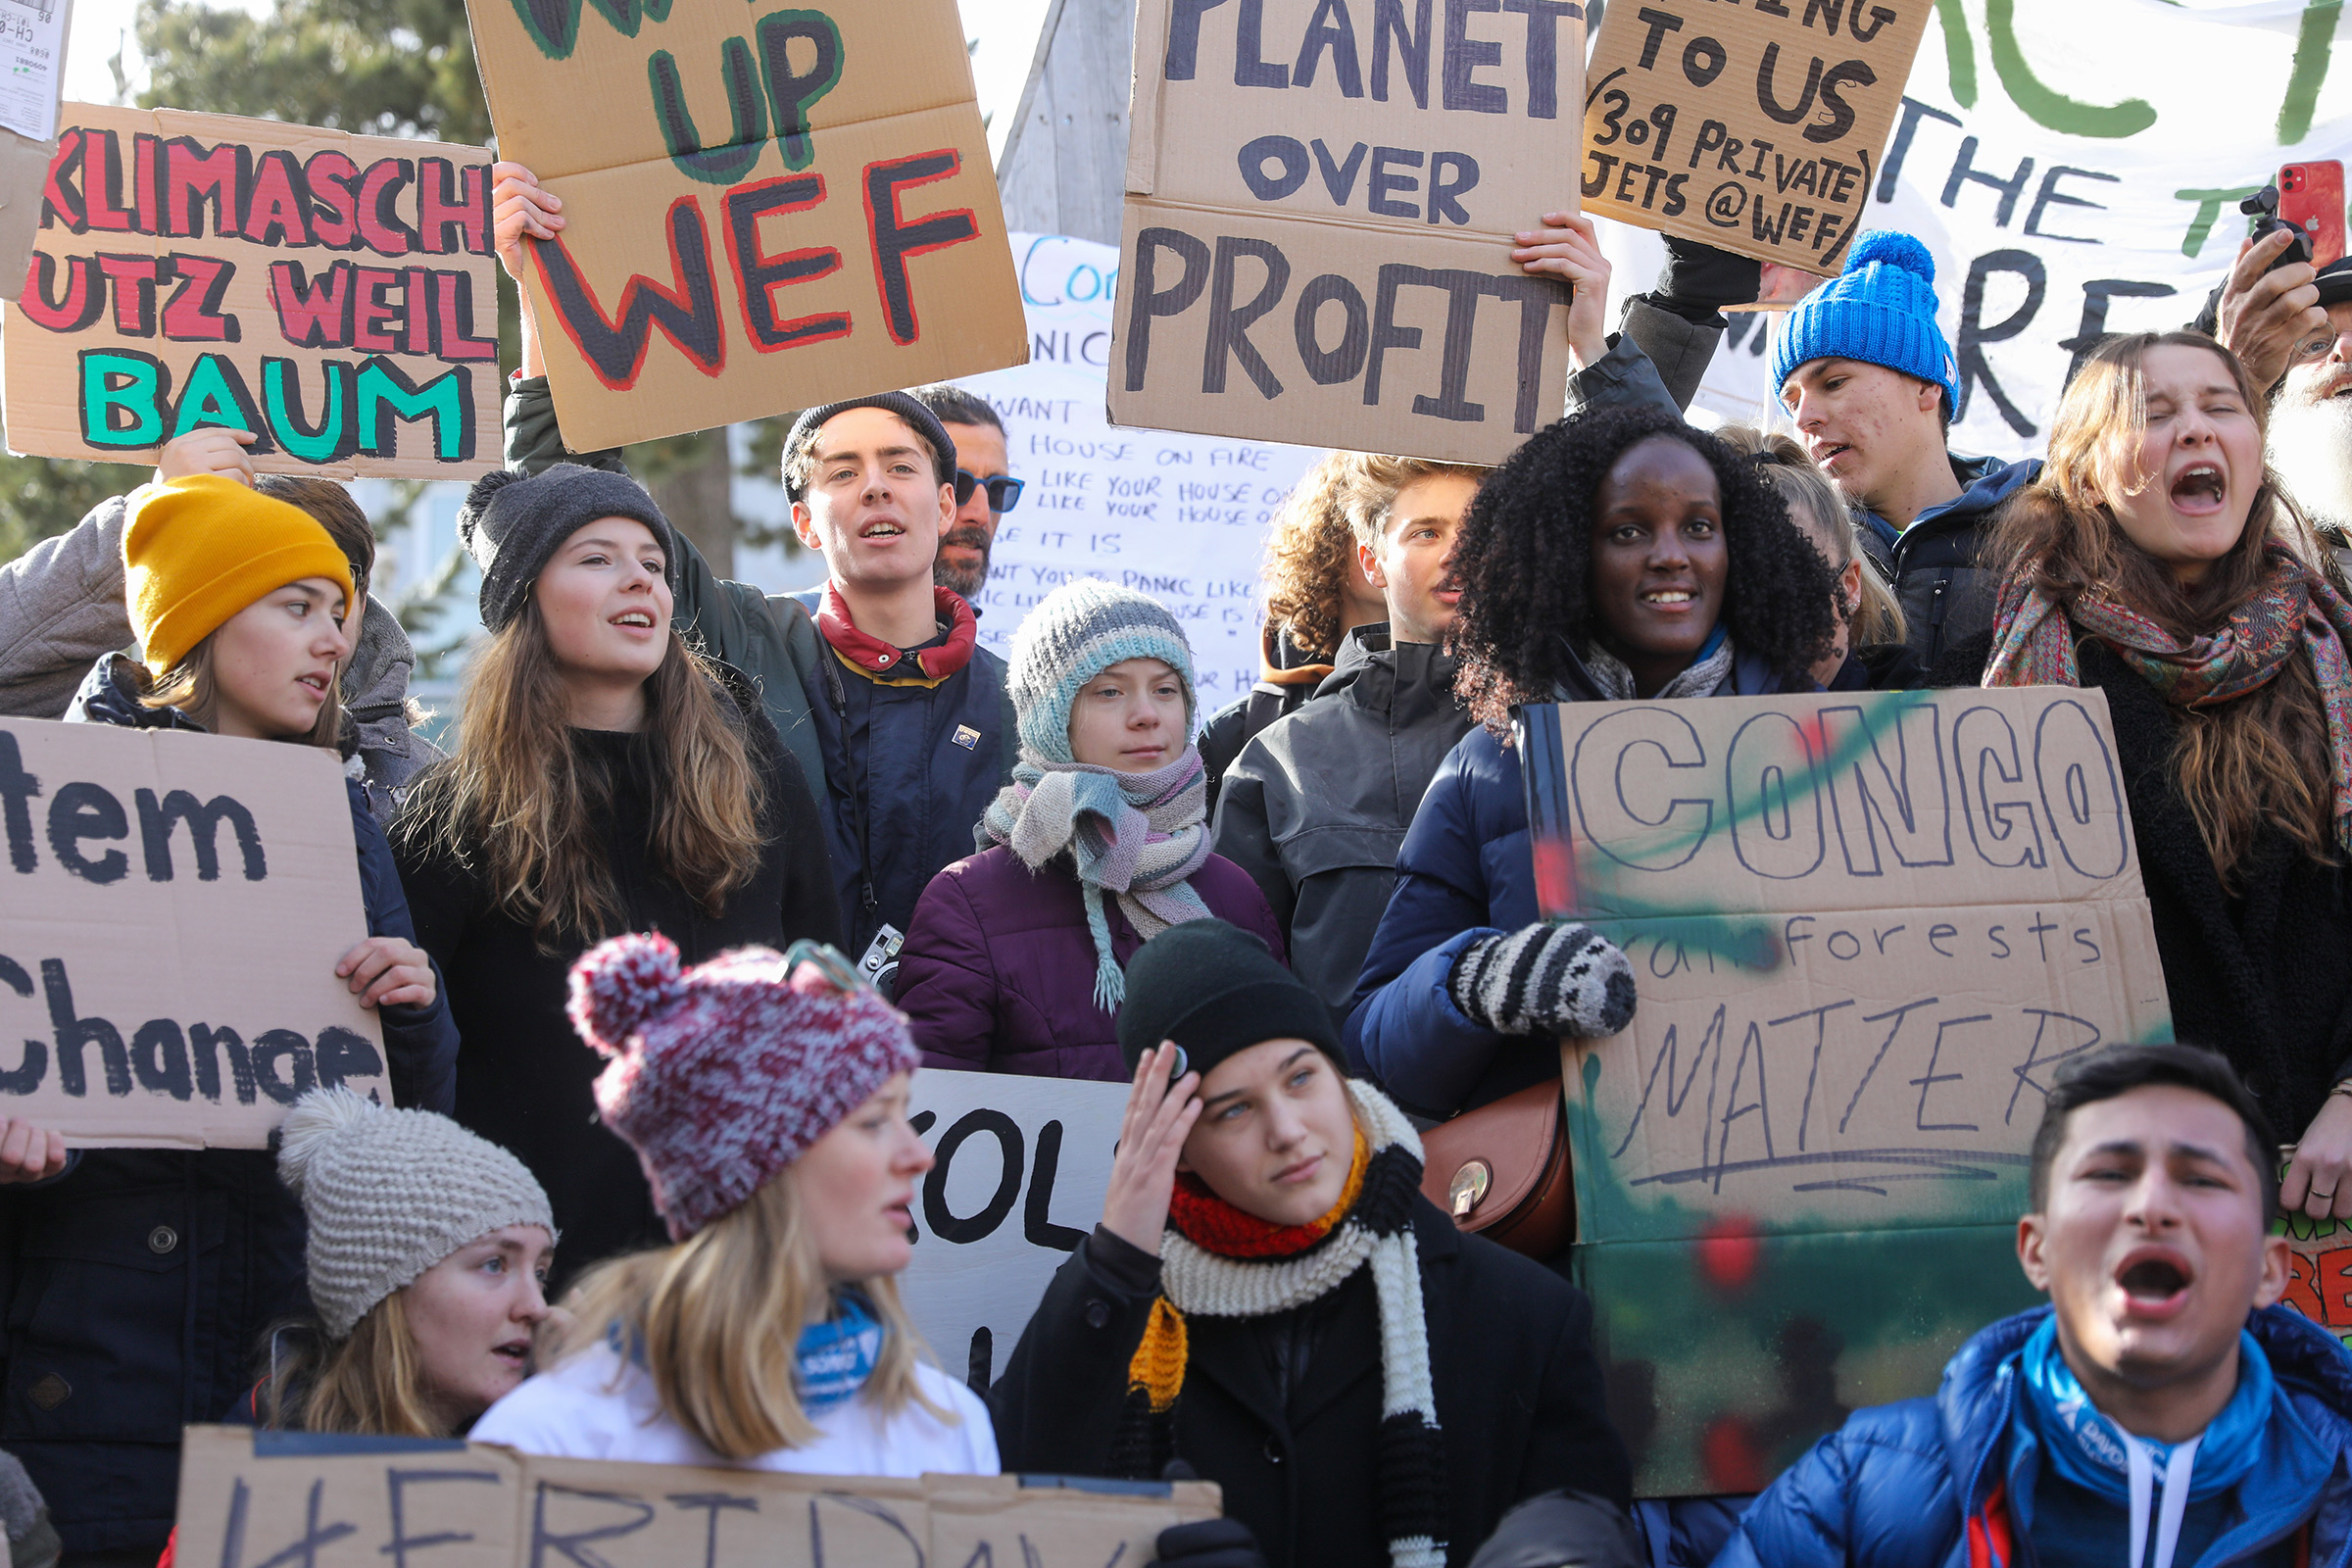 Nakate and other climate activists, including Greta Thunberg, Isabelle Axelsson and Luisa Neubauer, demonstrate during the World Economic Forum in Davos, Switzerland on Jan. 24, 2020. (Simon Dawson—Bloomberg/Getty Images)